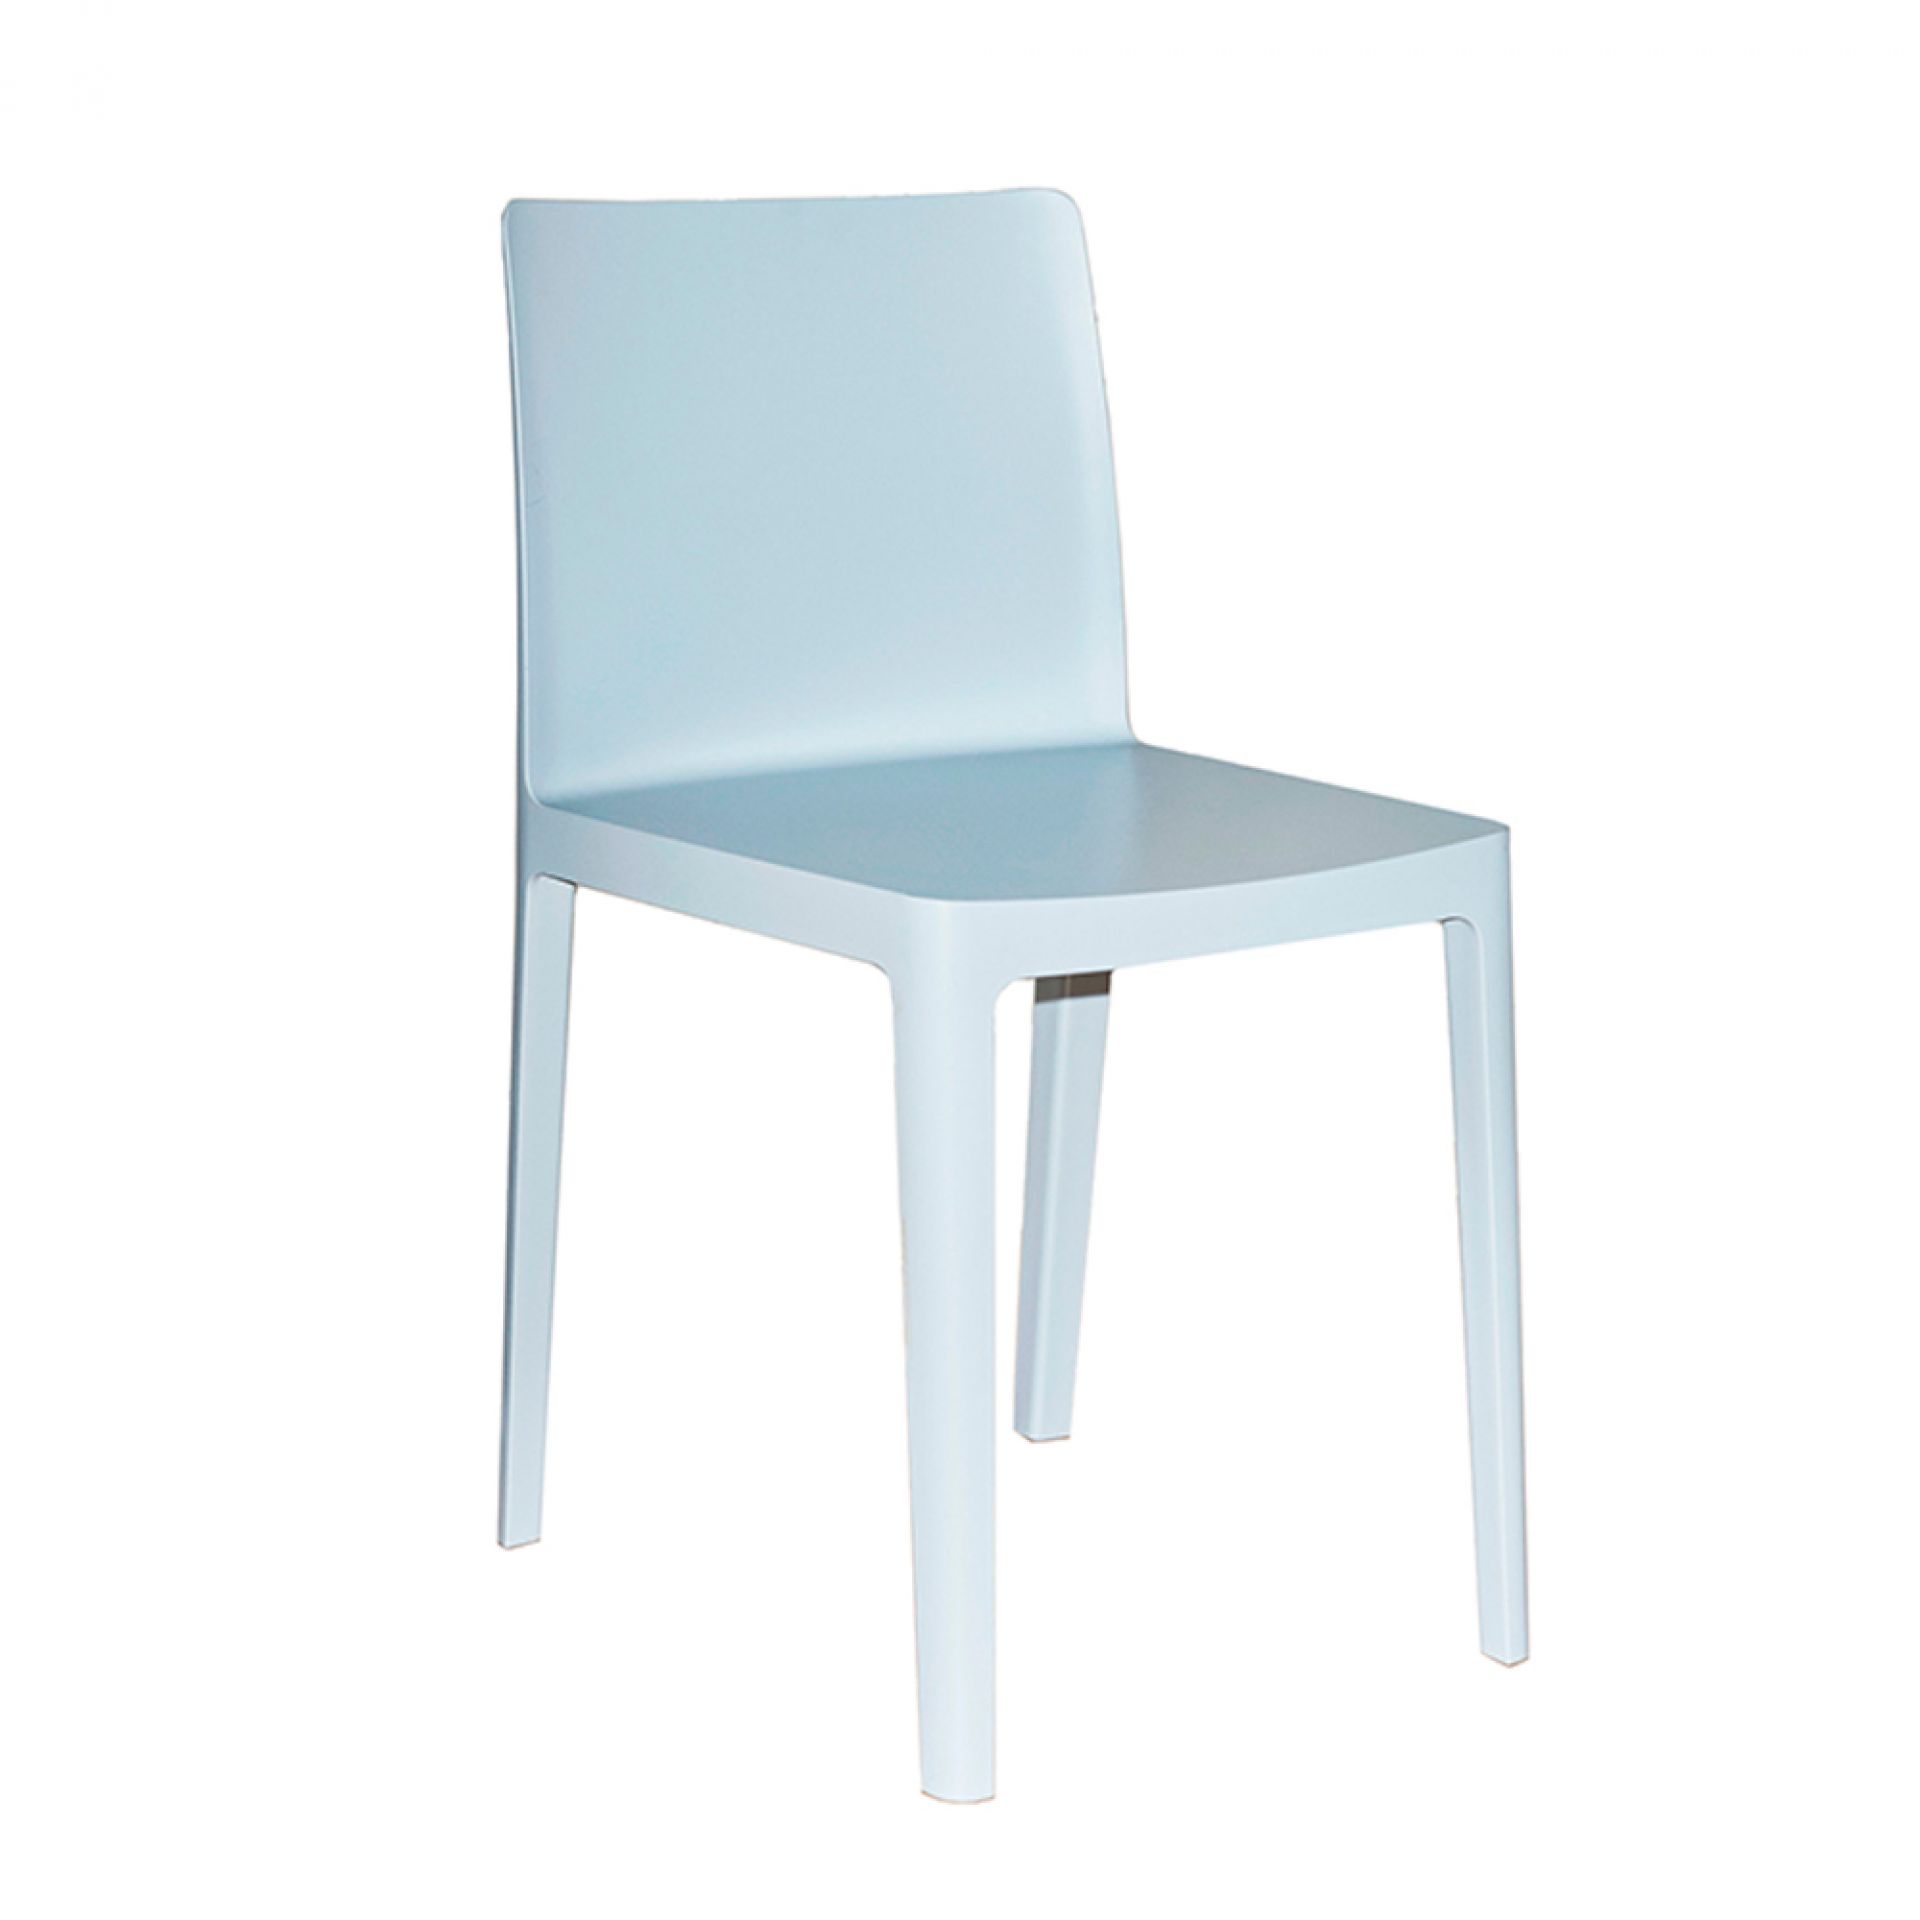 Élémentaire / Elementaire Chair Outdoor Blue | | AA602 HAY A230 Hay grey